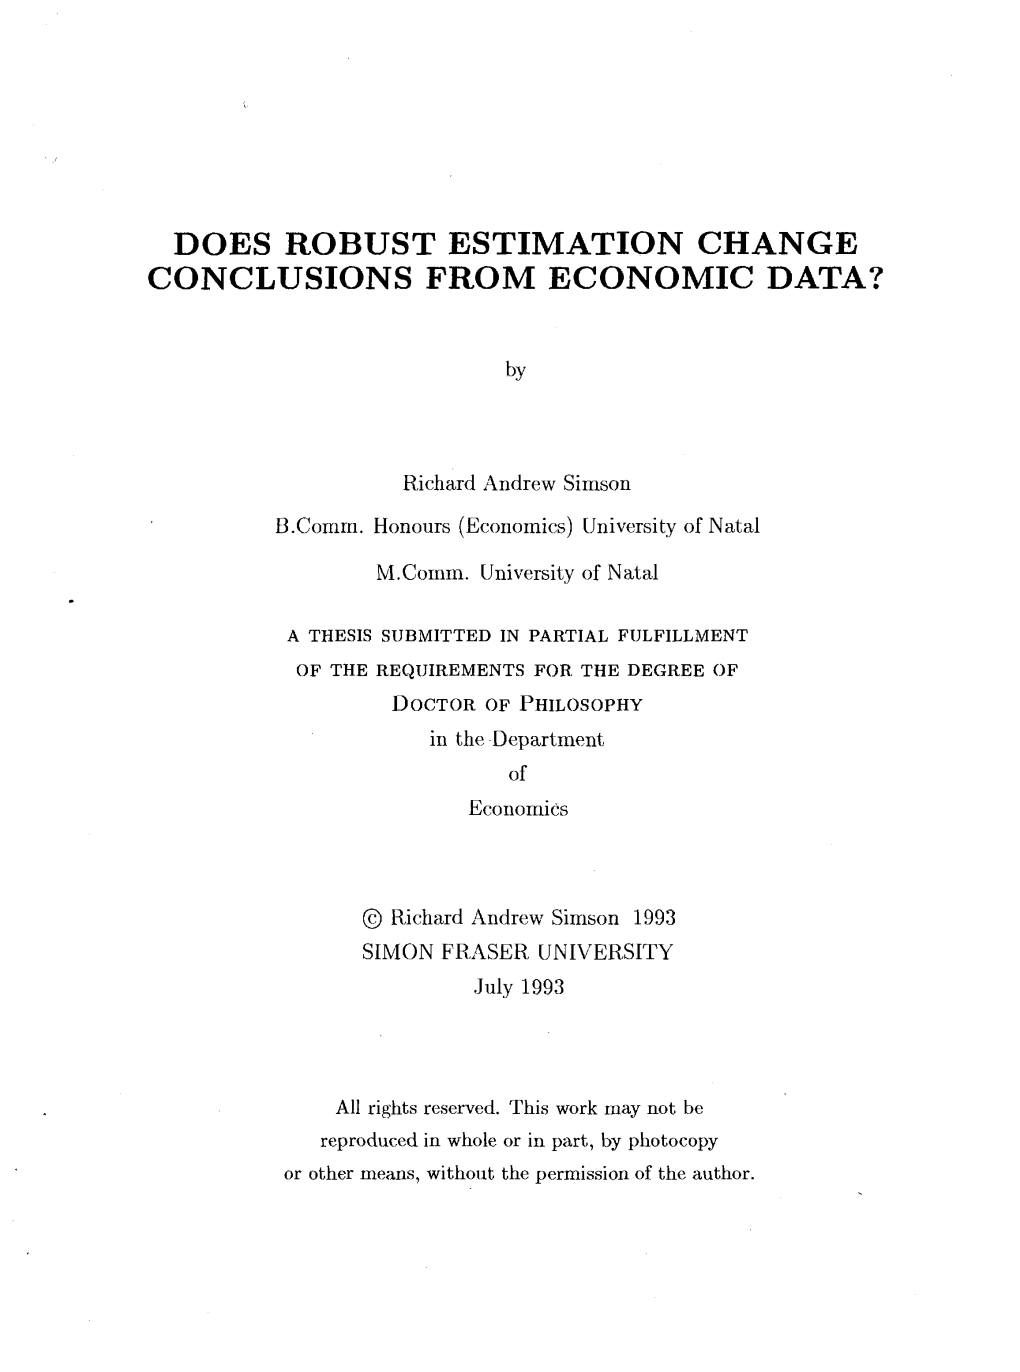 Does Robust Estimation Change Conclusions from Economic Data?